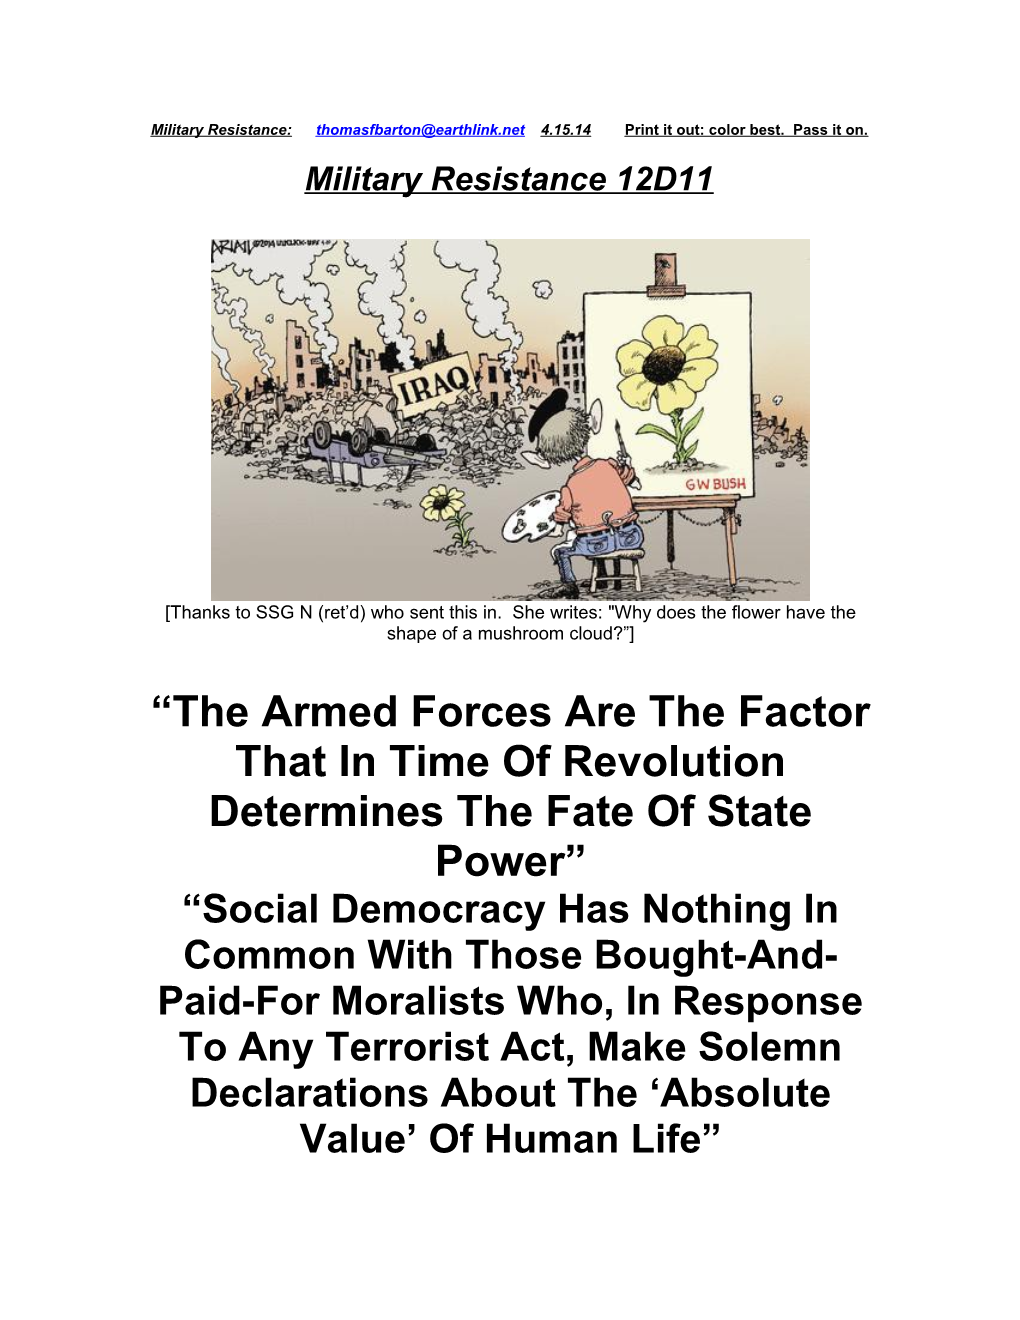 Military Resistance 12D11